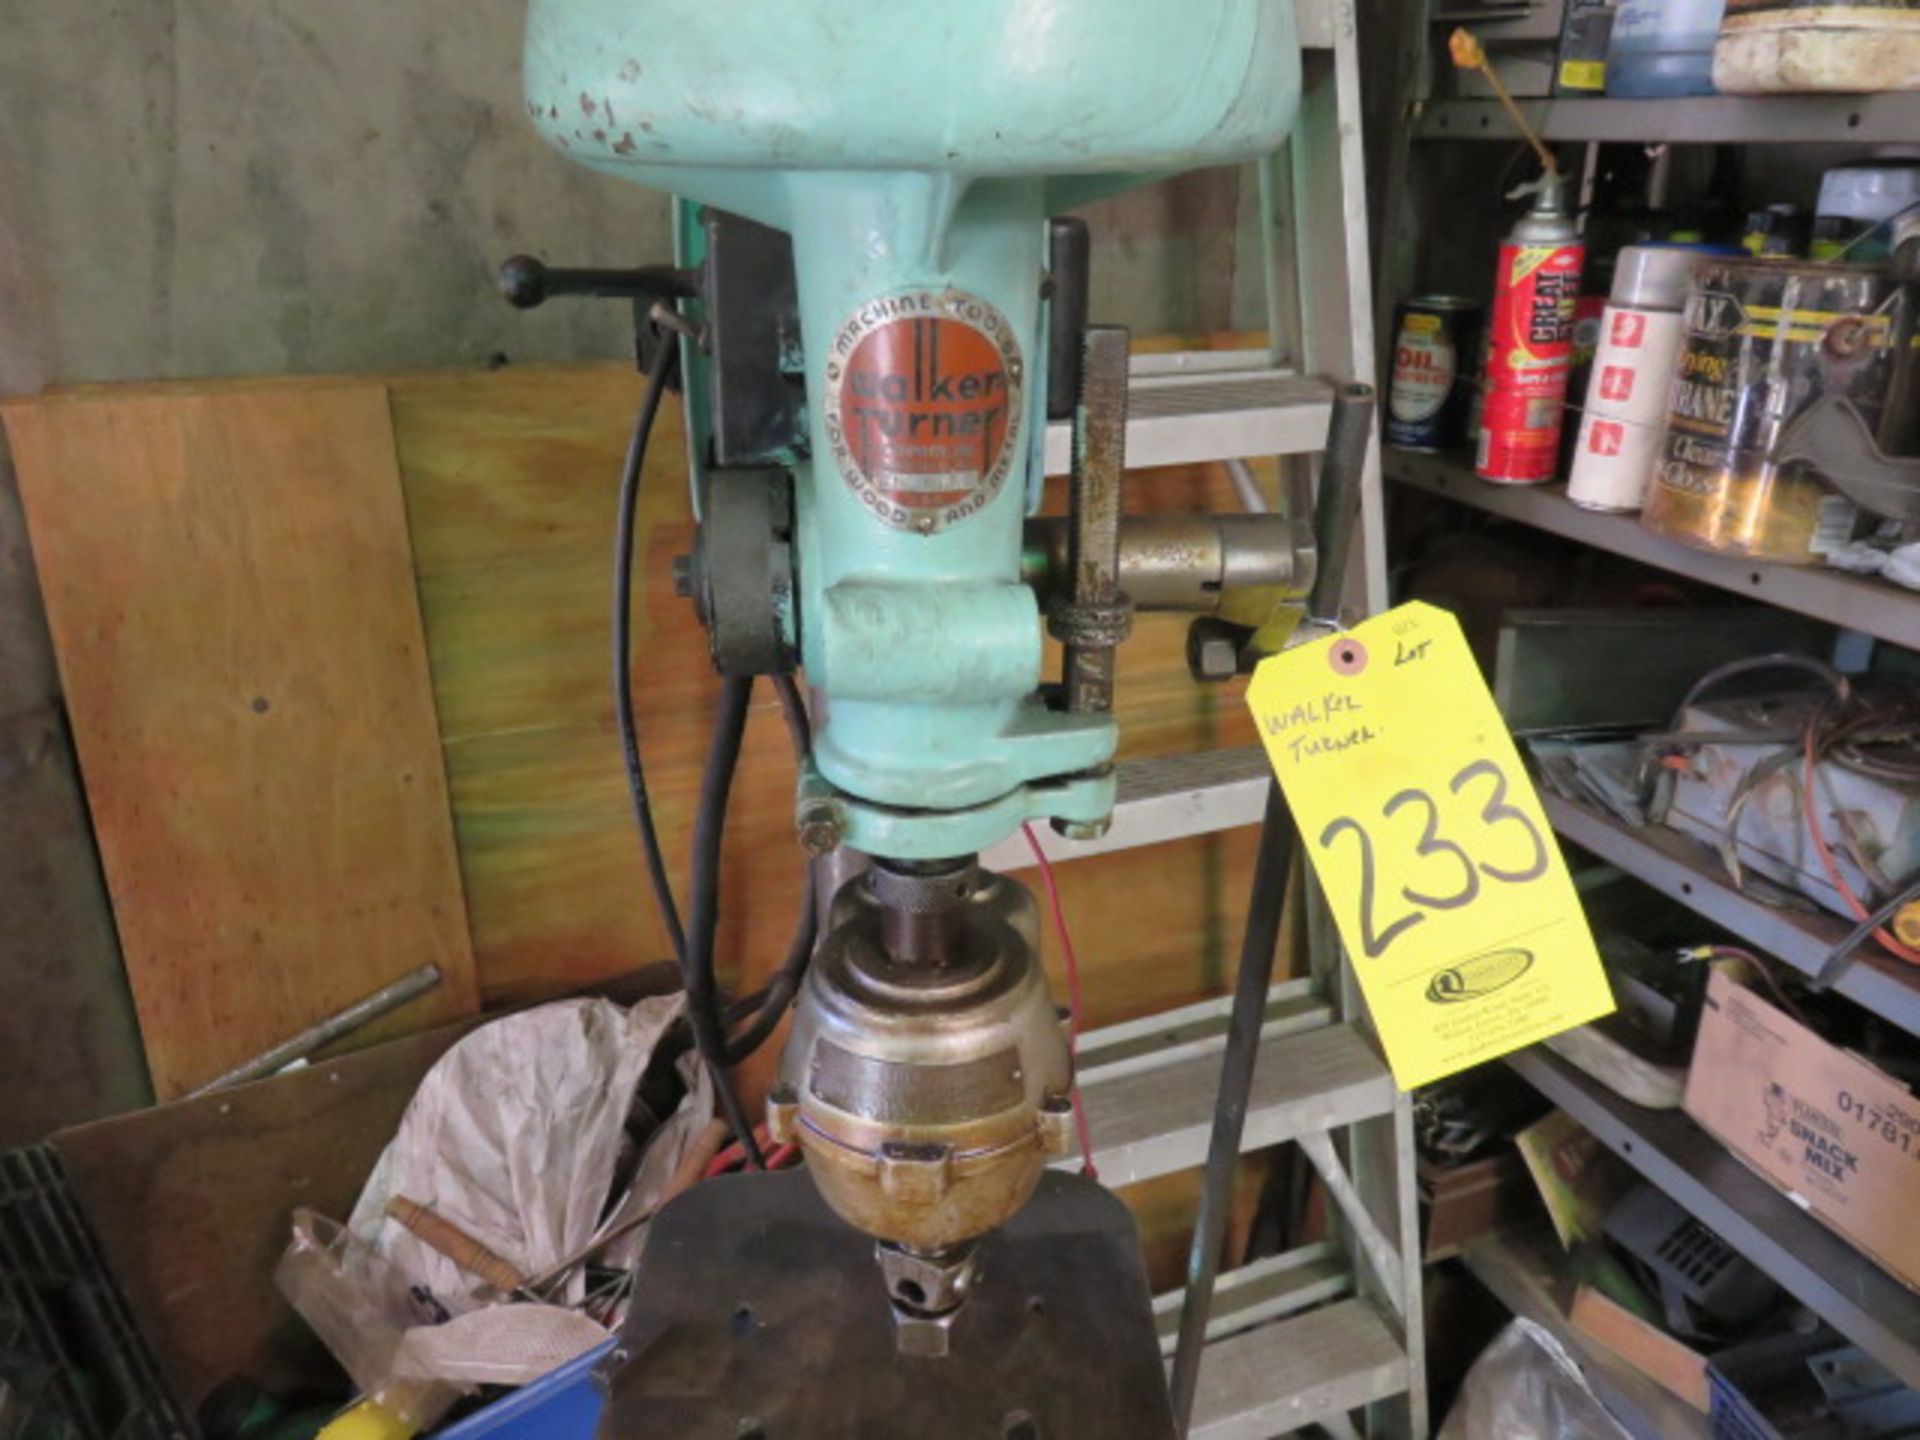 WALKER-TURNER 16 IN. PEDESTAL DRILL PRESS W/TAPPING HEAD - Image 2 of 2